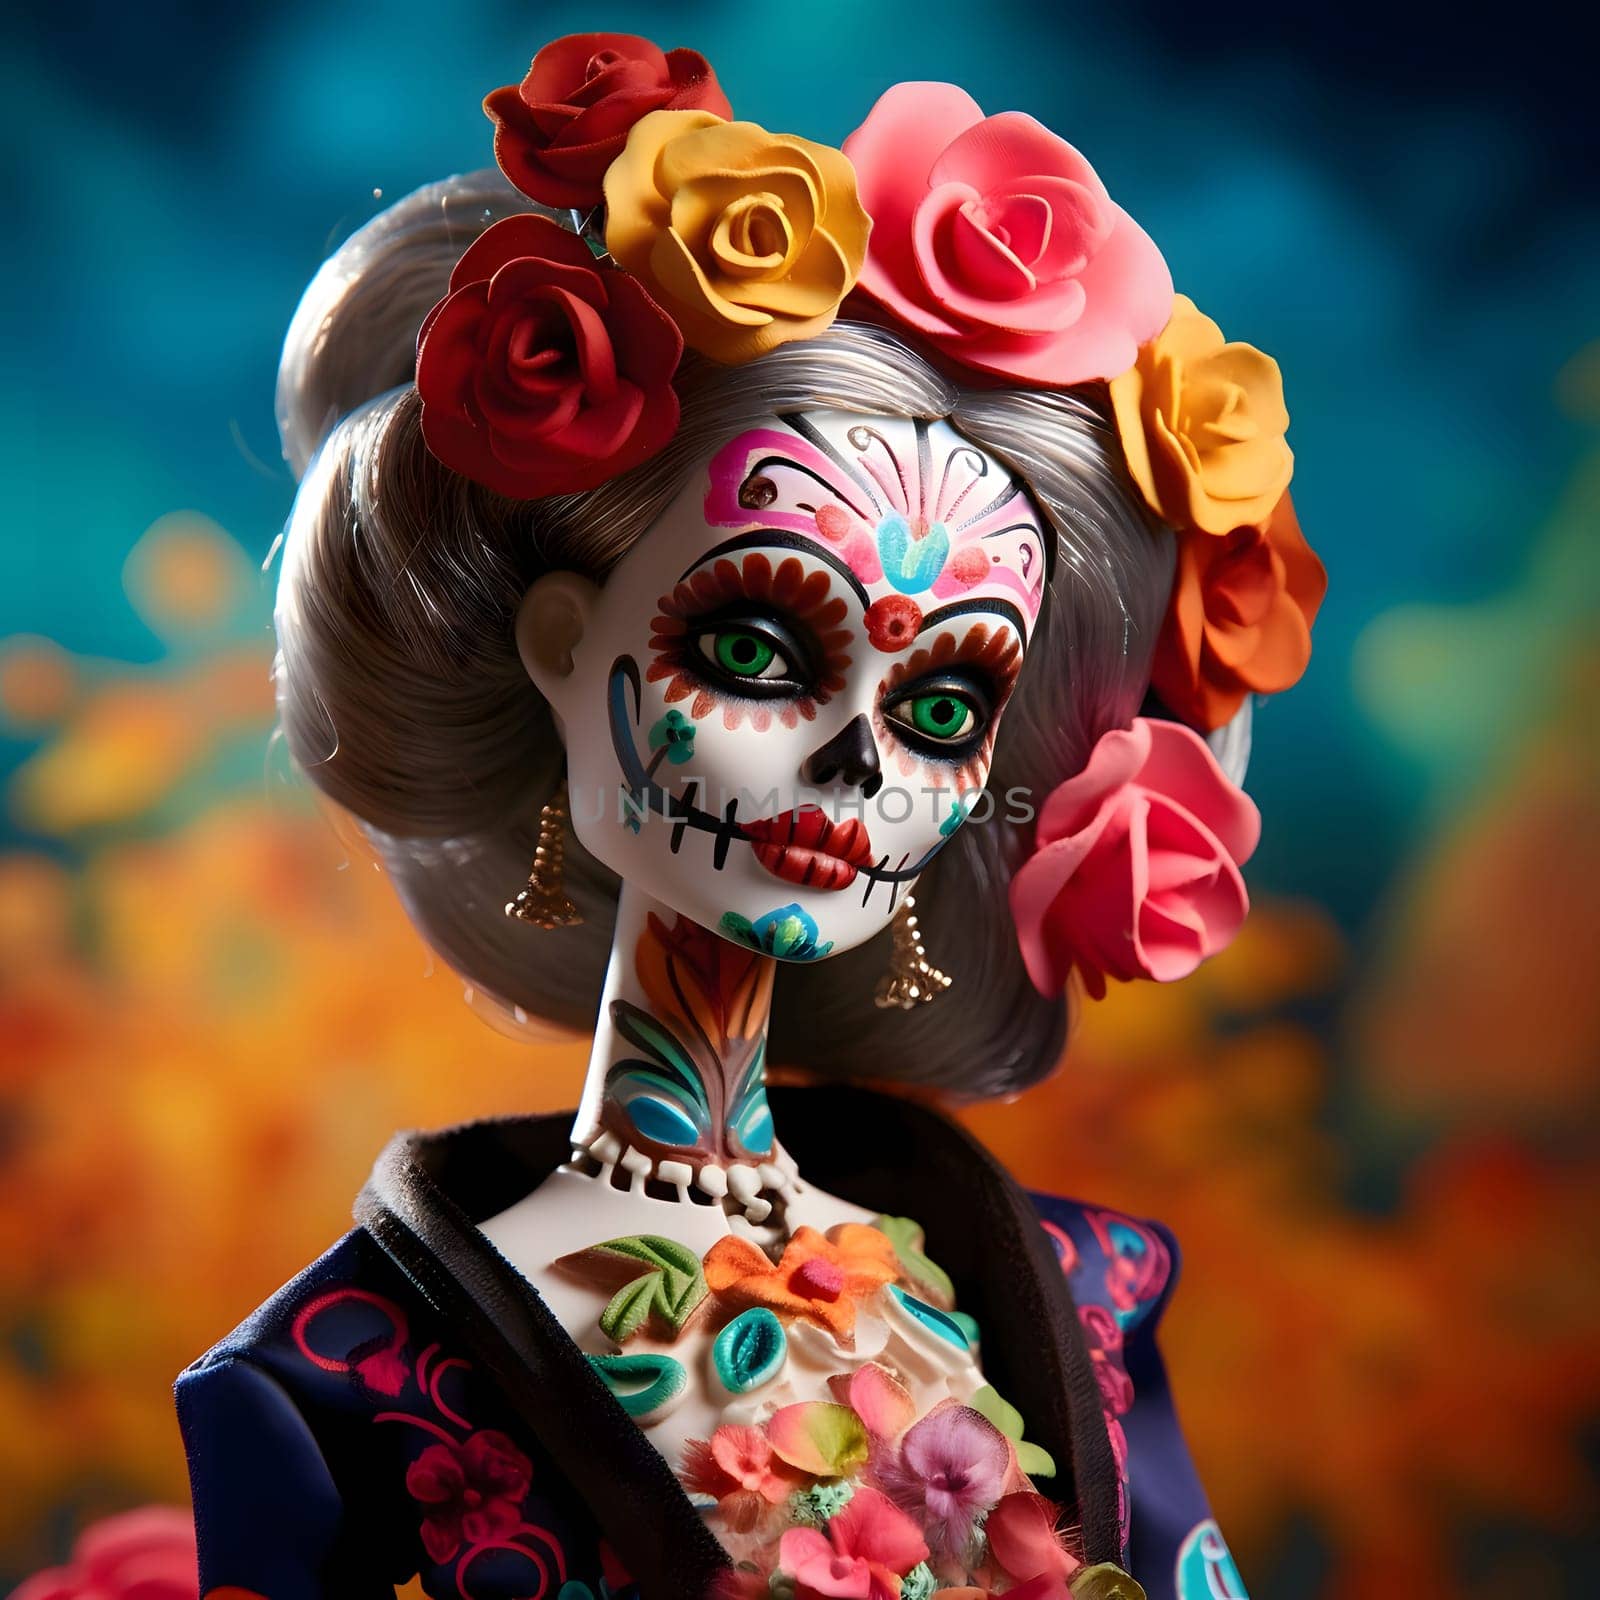 Woman with decorated painted face, elegant party outfit, roses flowers in hair, blurred background. For the day of the dead and Halloween. Atmosphere of death and solemnity.